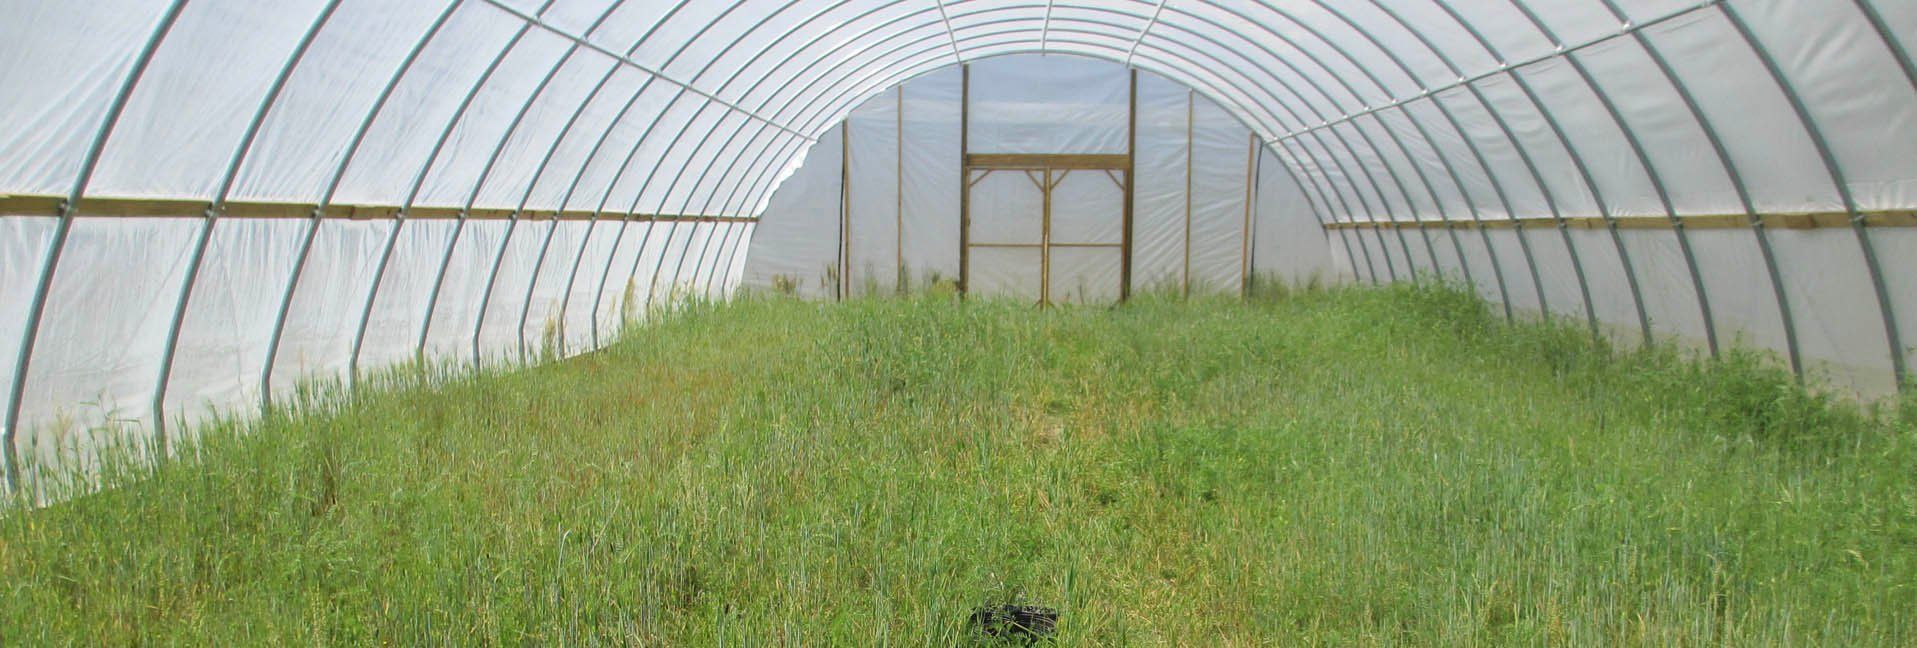 Cover crops have surprising benefits in high tunnels